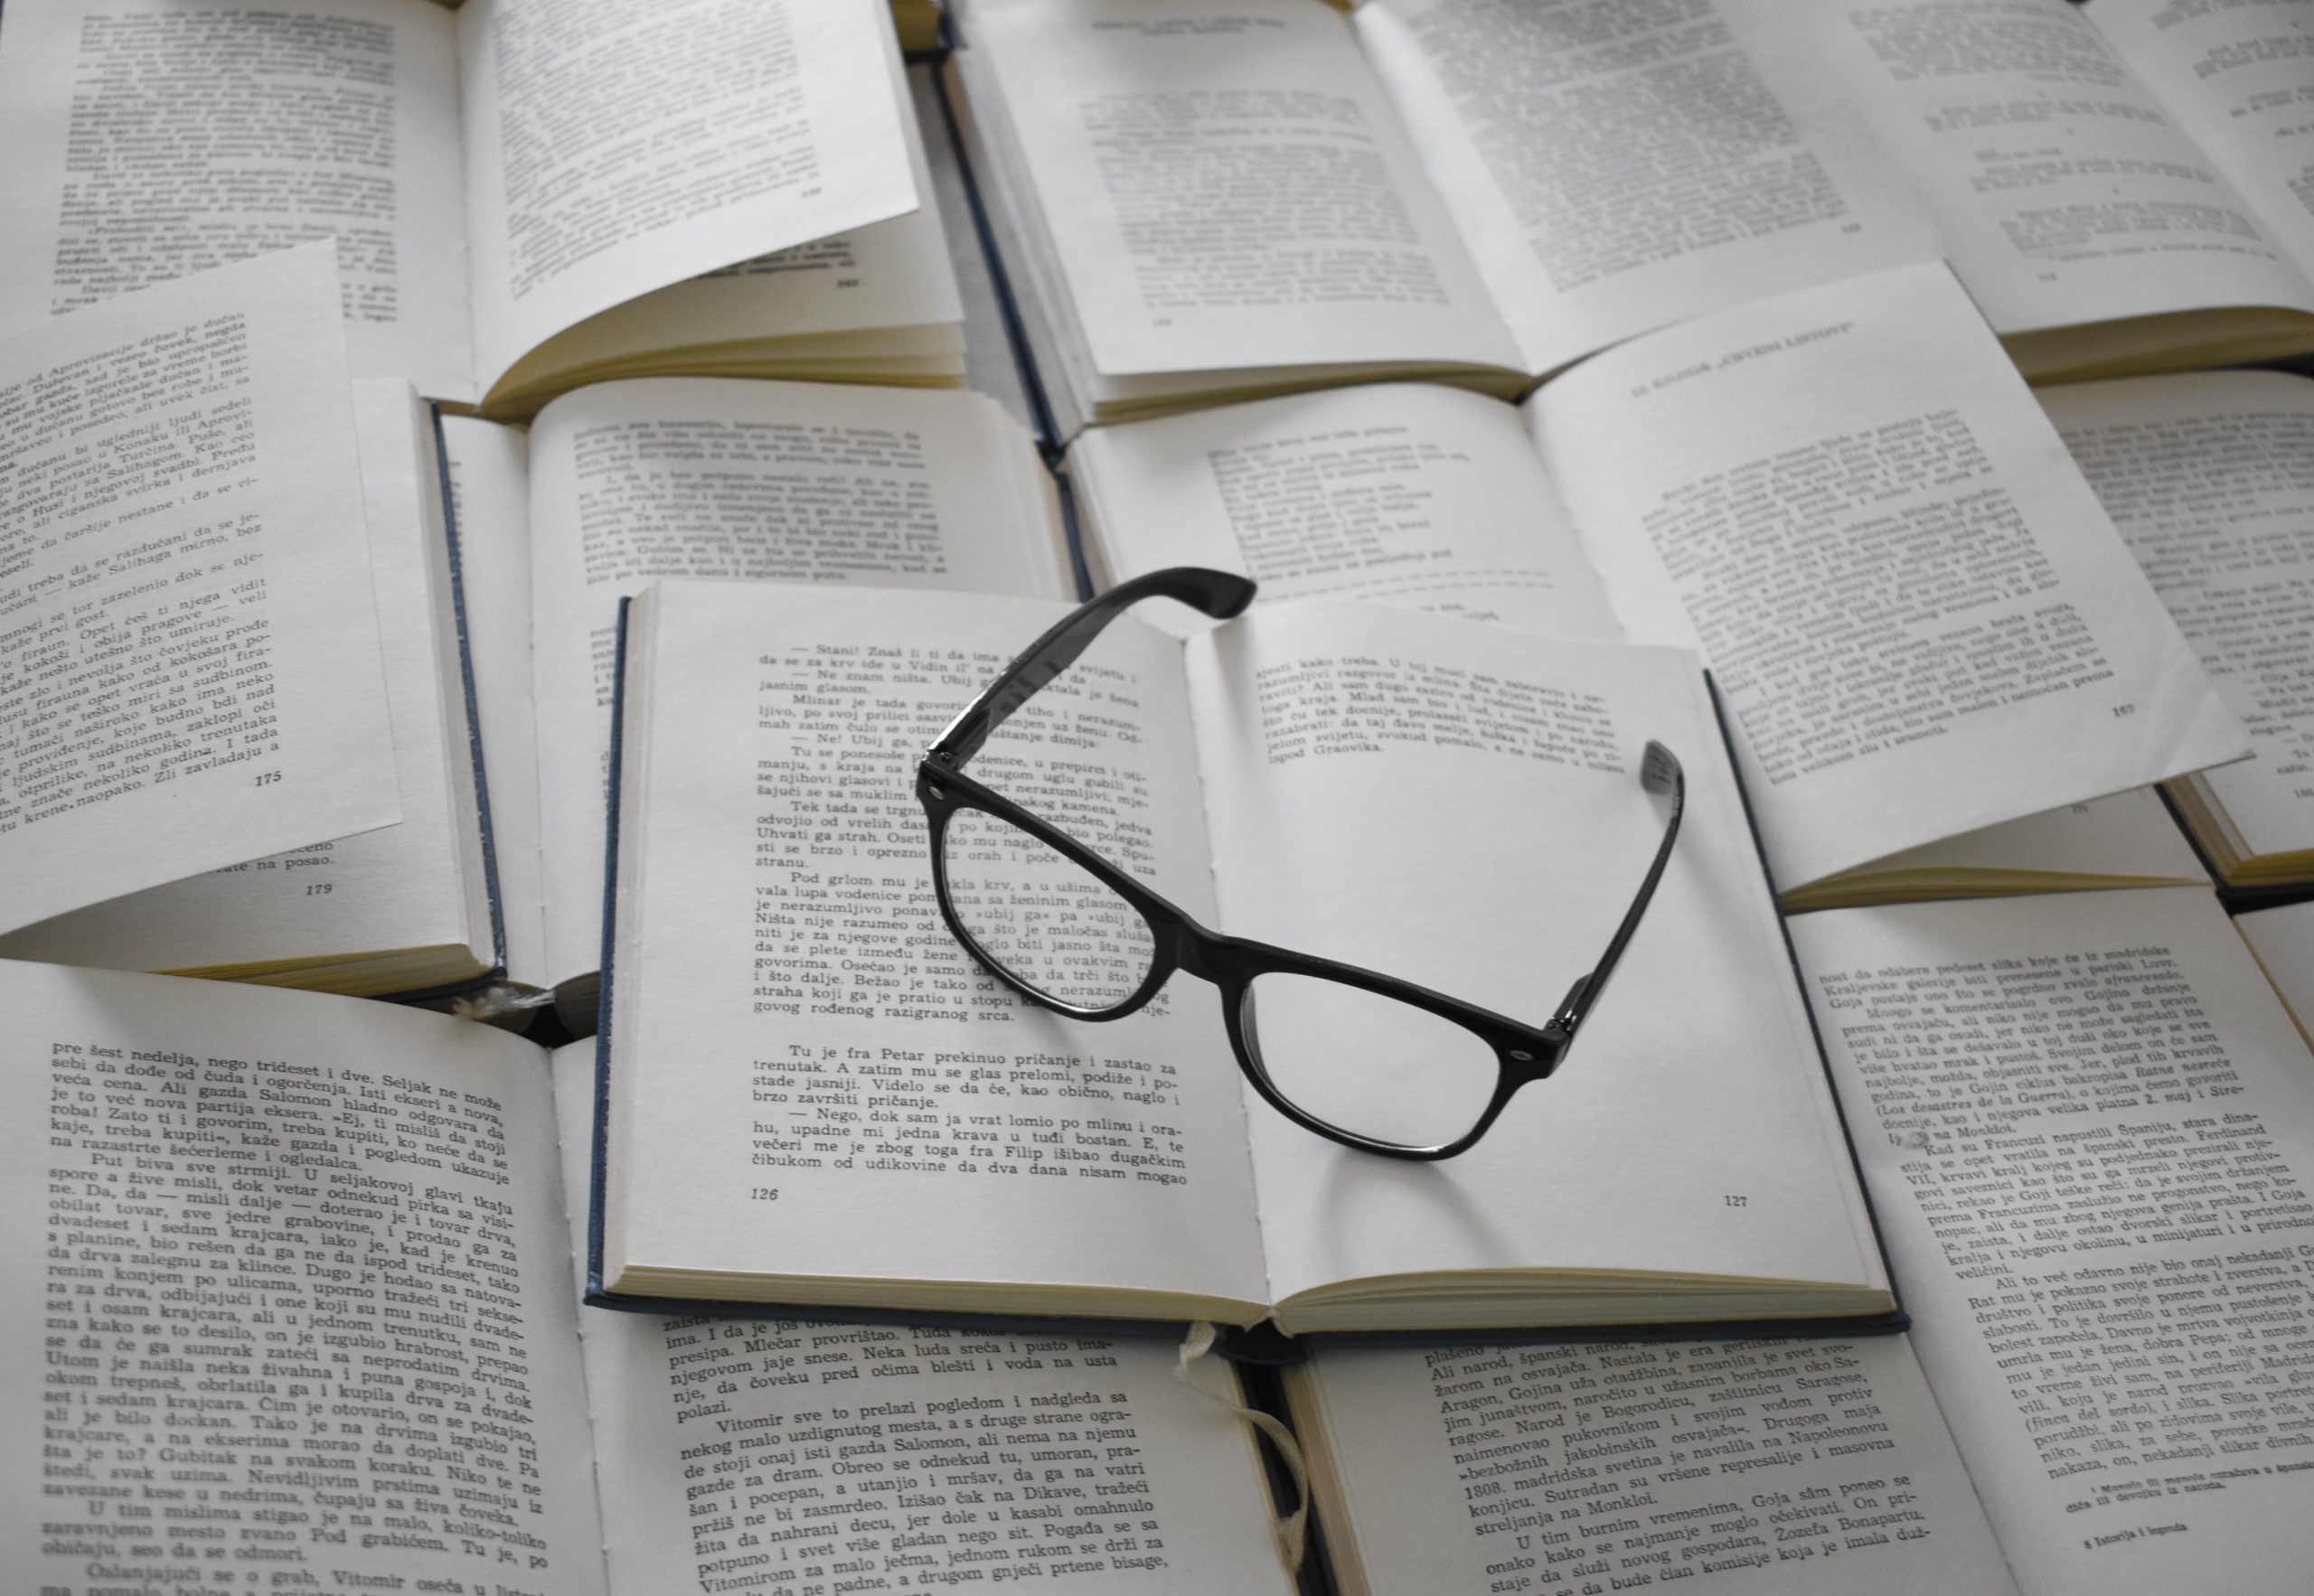 Many open books with eyeglasses on sitting on top